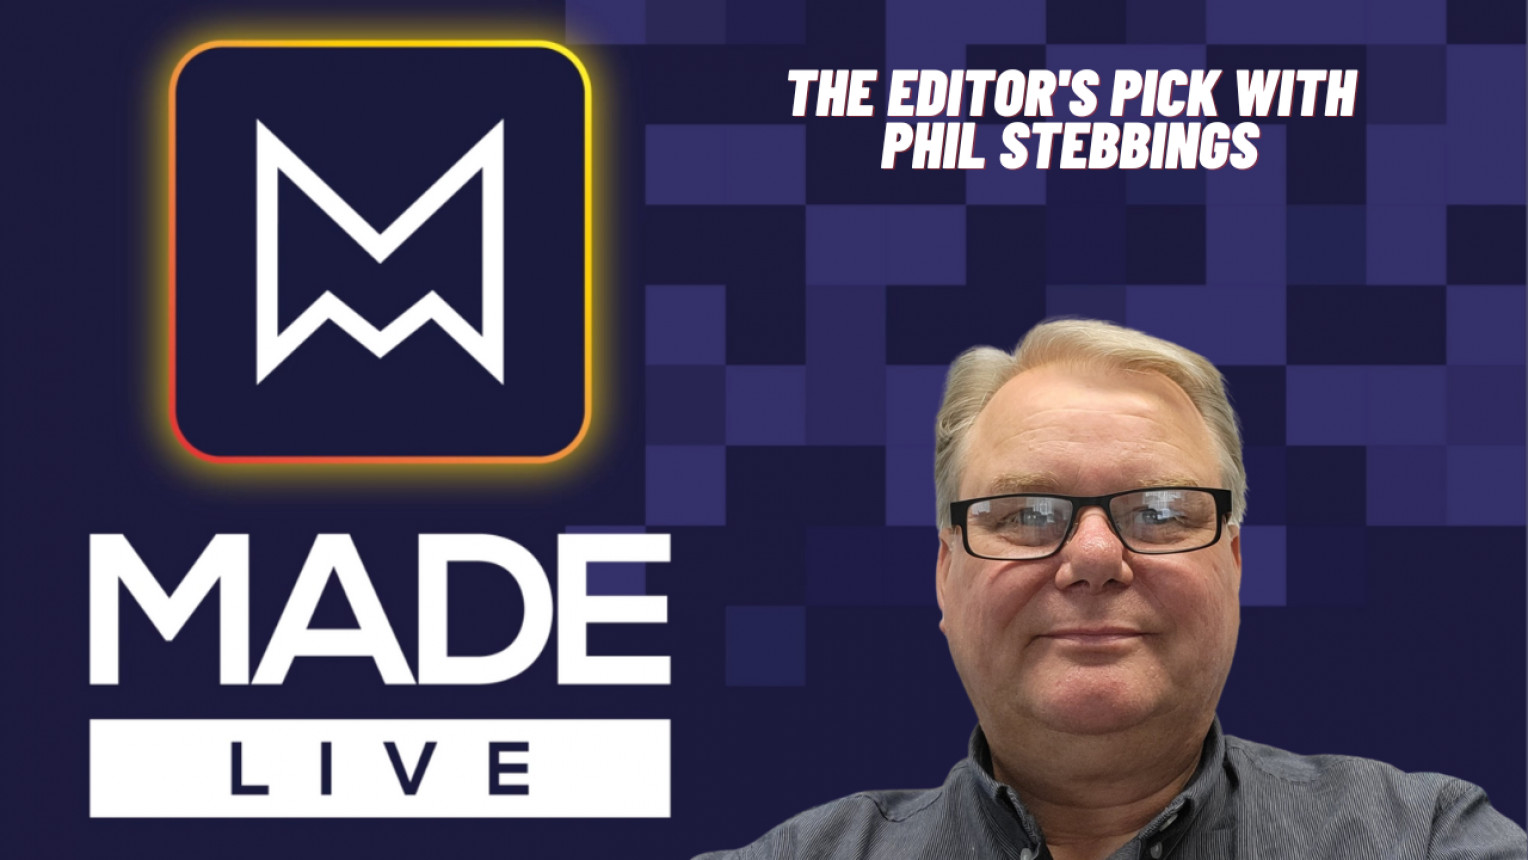 Made LIVE TV: The Editor's Pick with Phil Stebbings